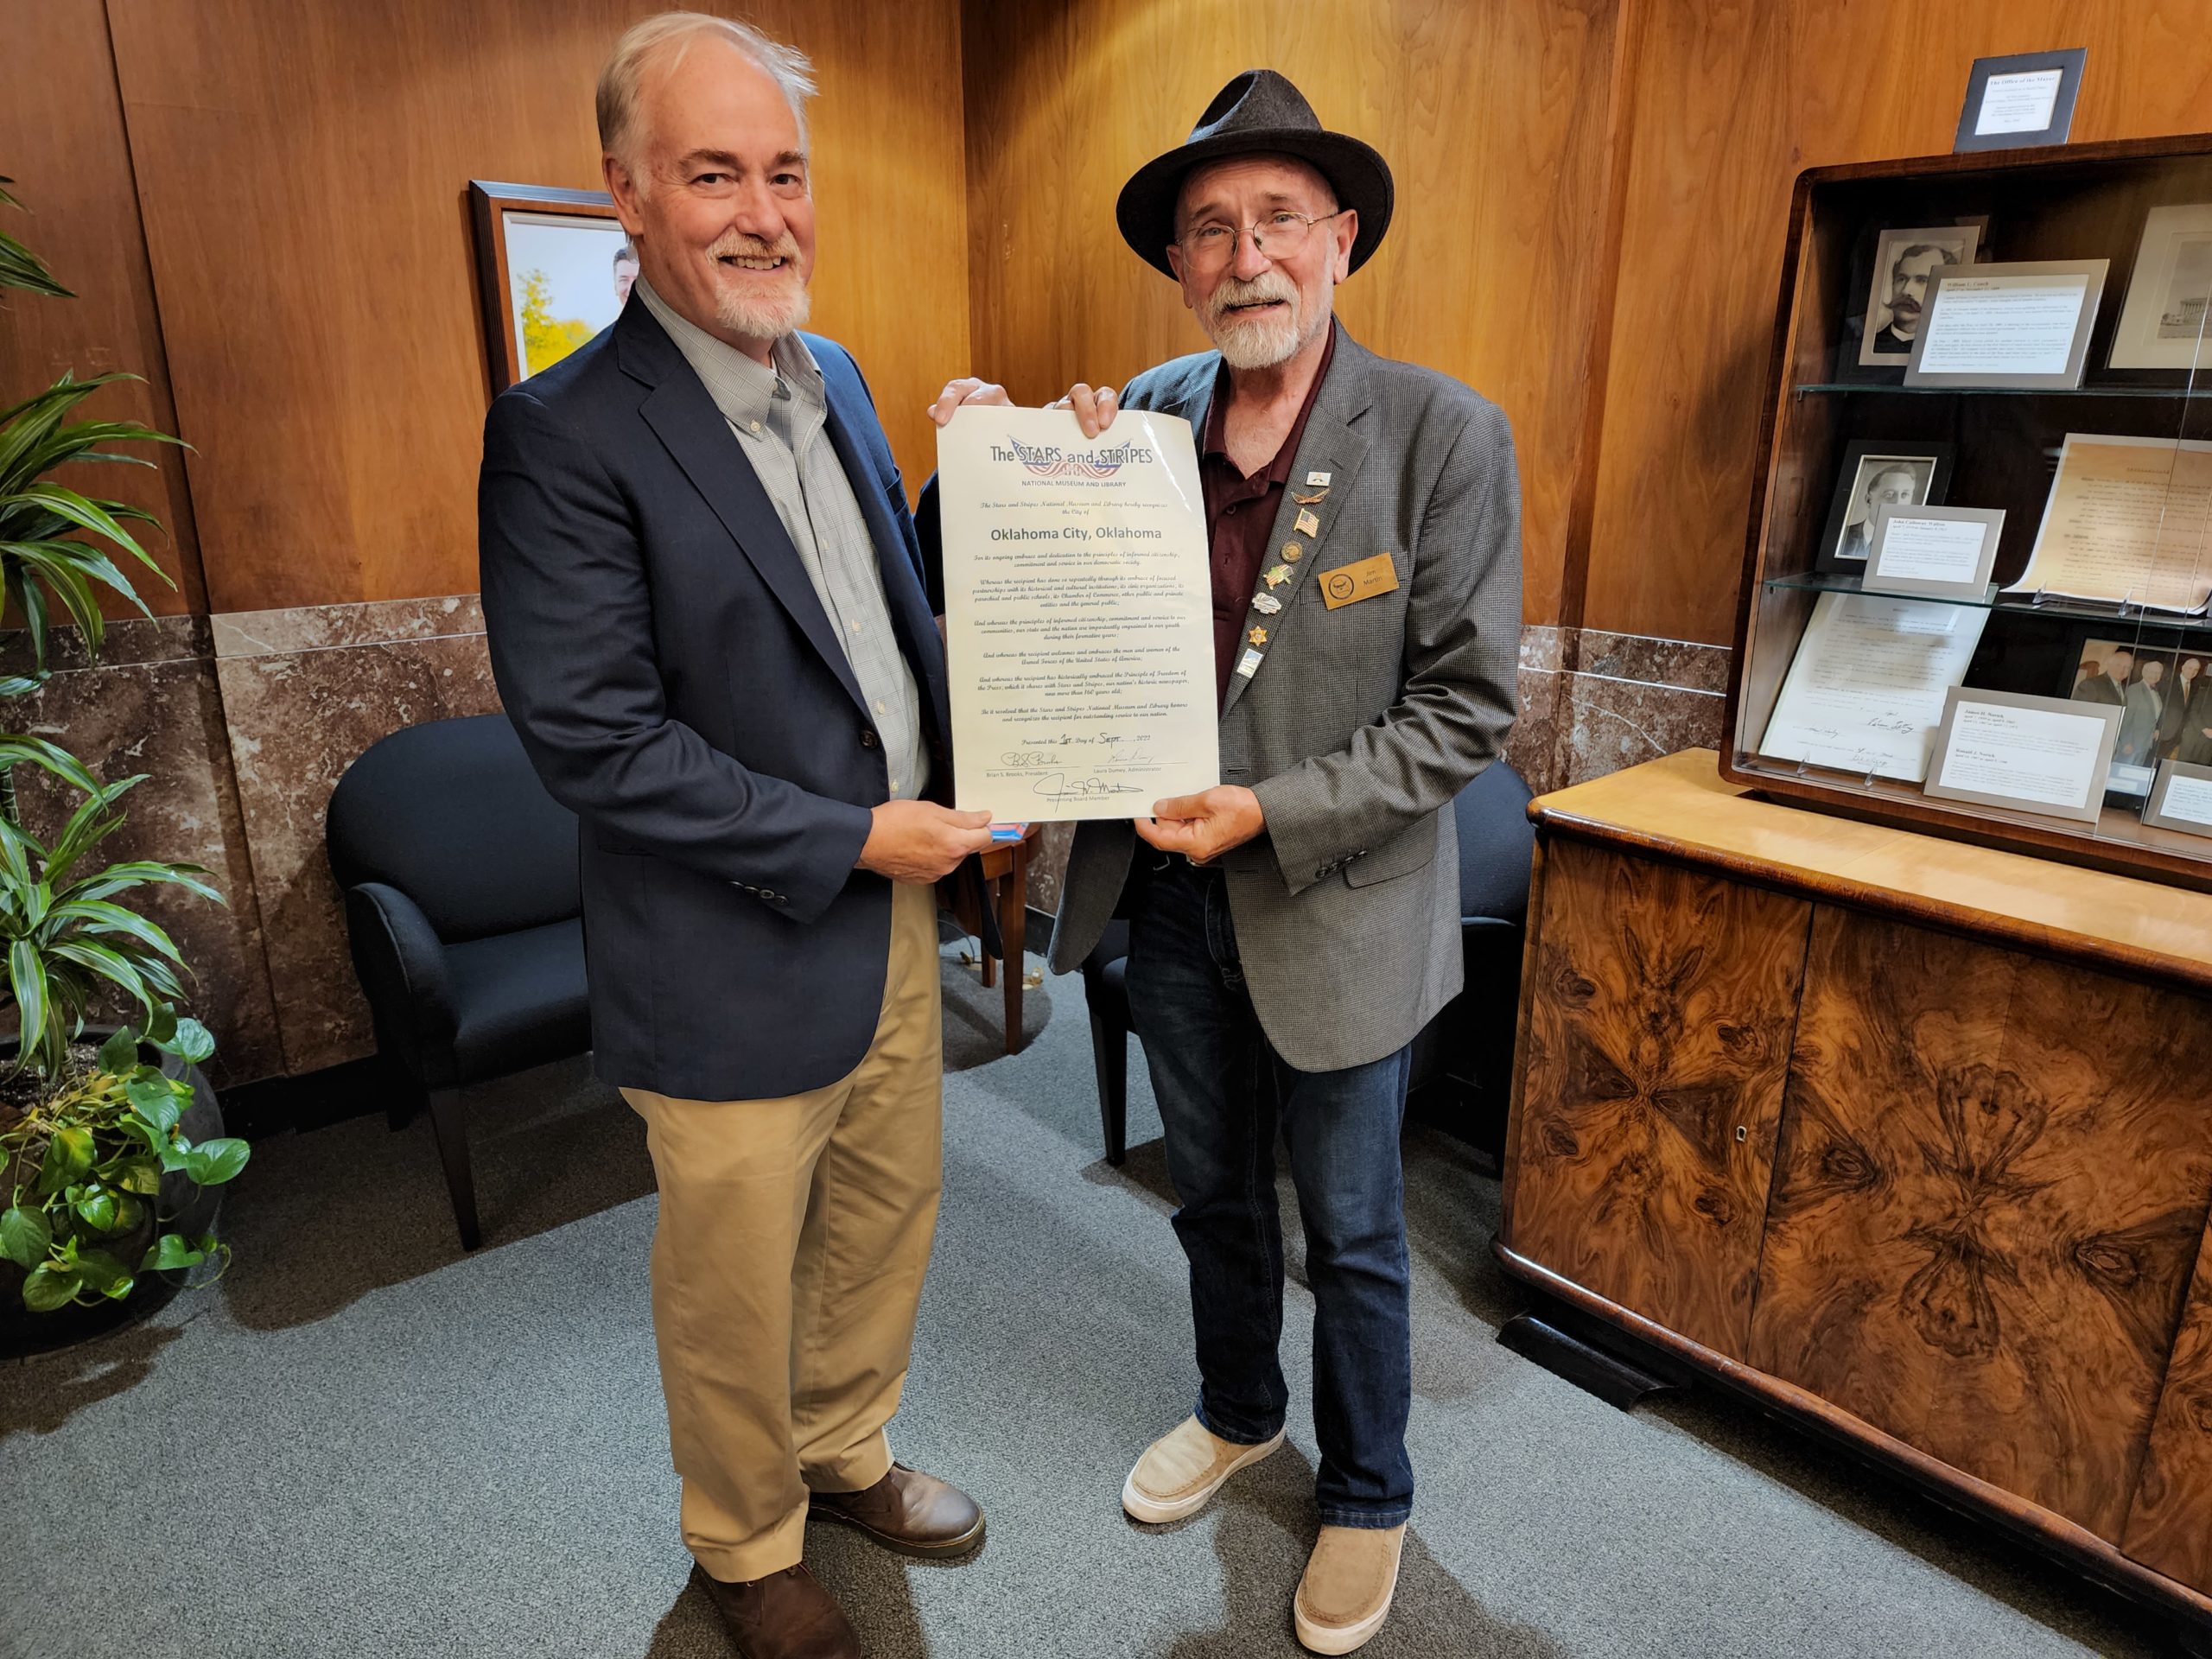 On Thursday, September 1, 2022, Jim Martin presented the Stars and Stripes City Proclamation to Oklahoma City which was accepted by chief of staff Steve Hill.